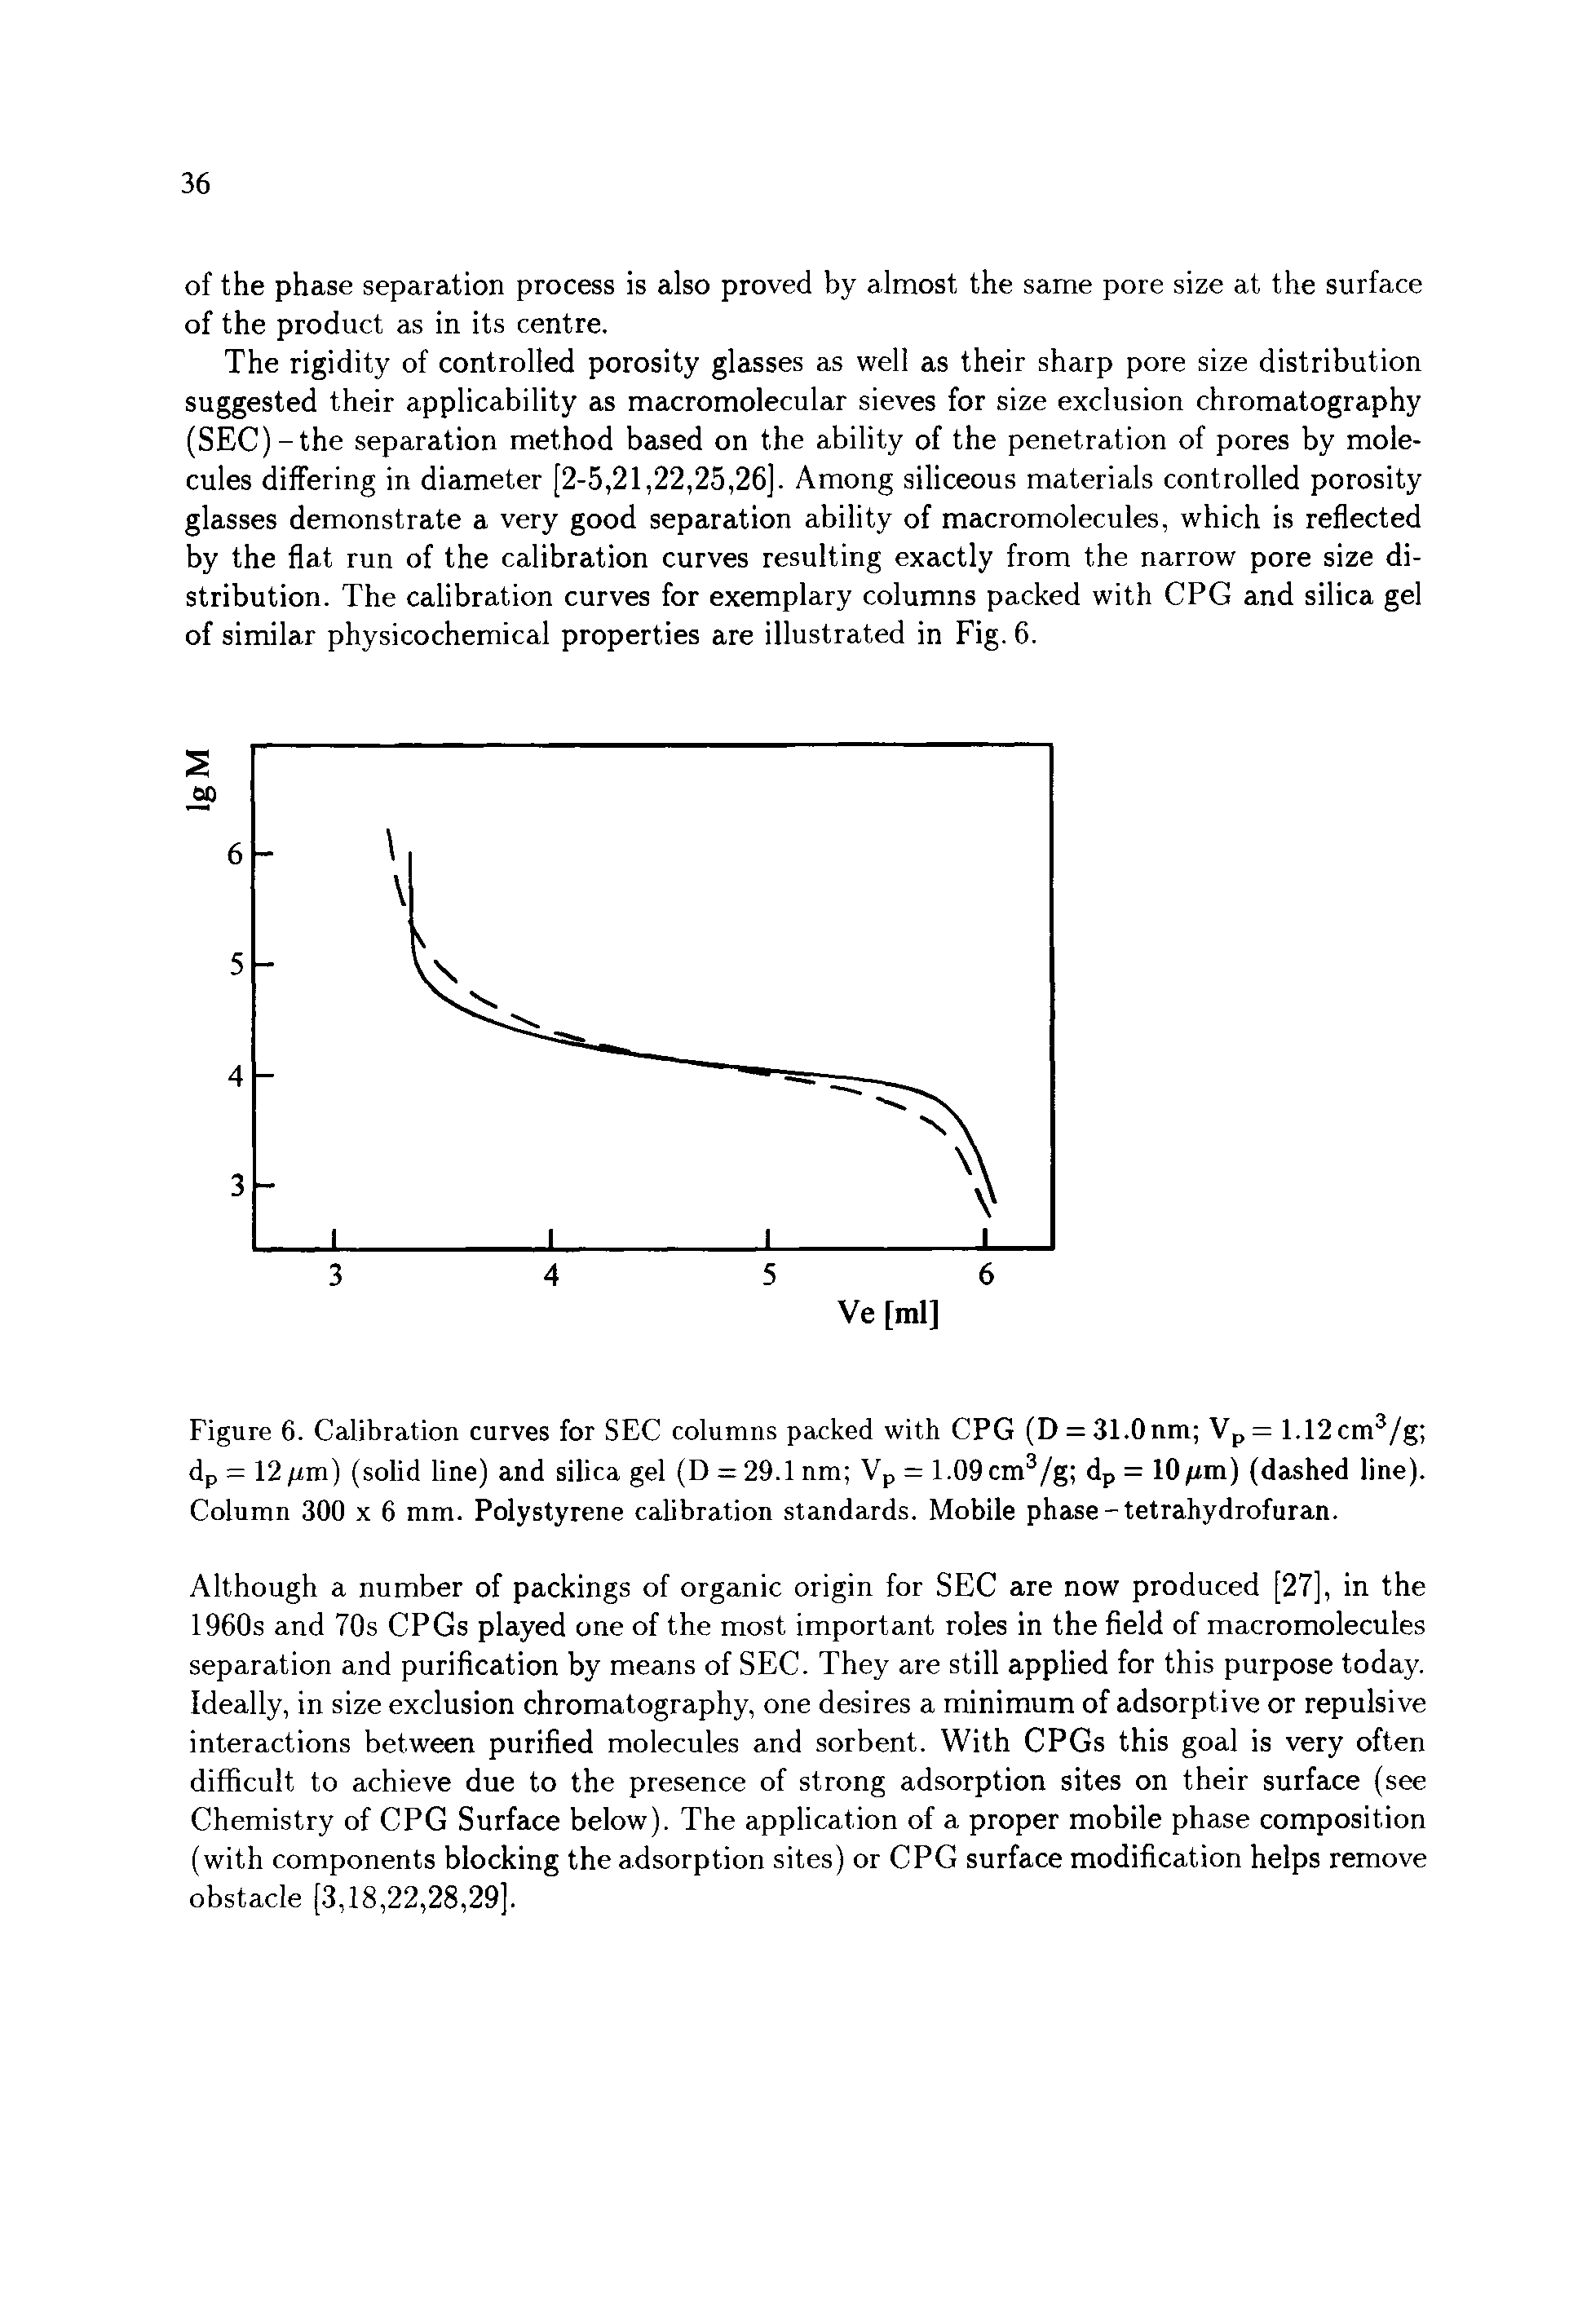 Figure 6. Calibration curves for SEC columns packed with CPG (D = 31.0nm Vp= 1.12cm /g dp = 12/rm) (solid line) and silica gel (D = 29.1 nm Vp = 1.09cm /g dp = 10/rm) (dashed line). Column 300 x 6 mm. Polystyrene calibration standards. Mobile phase-tetrahydrofuran.